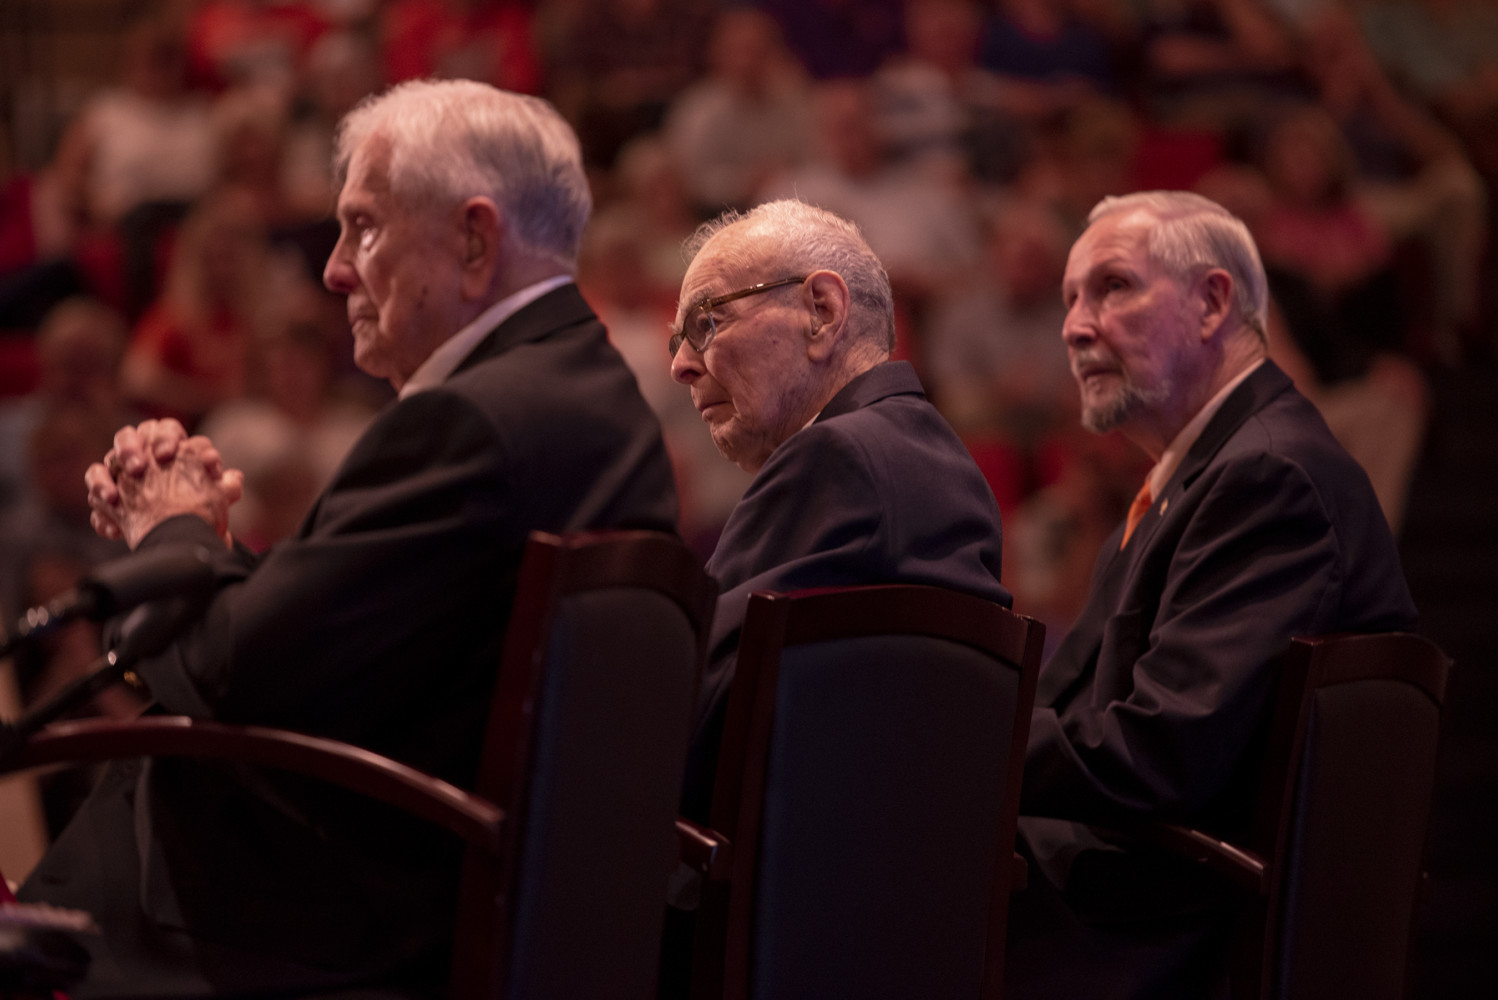 Profile shot of three men in suits with audience in the background